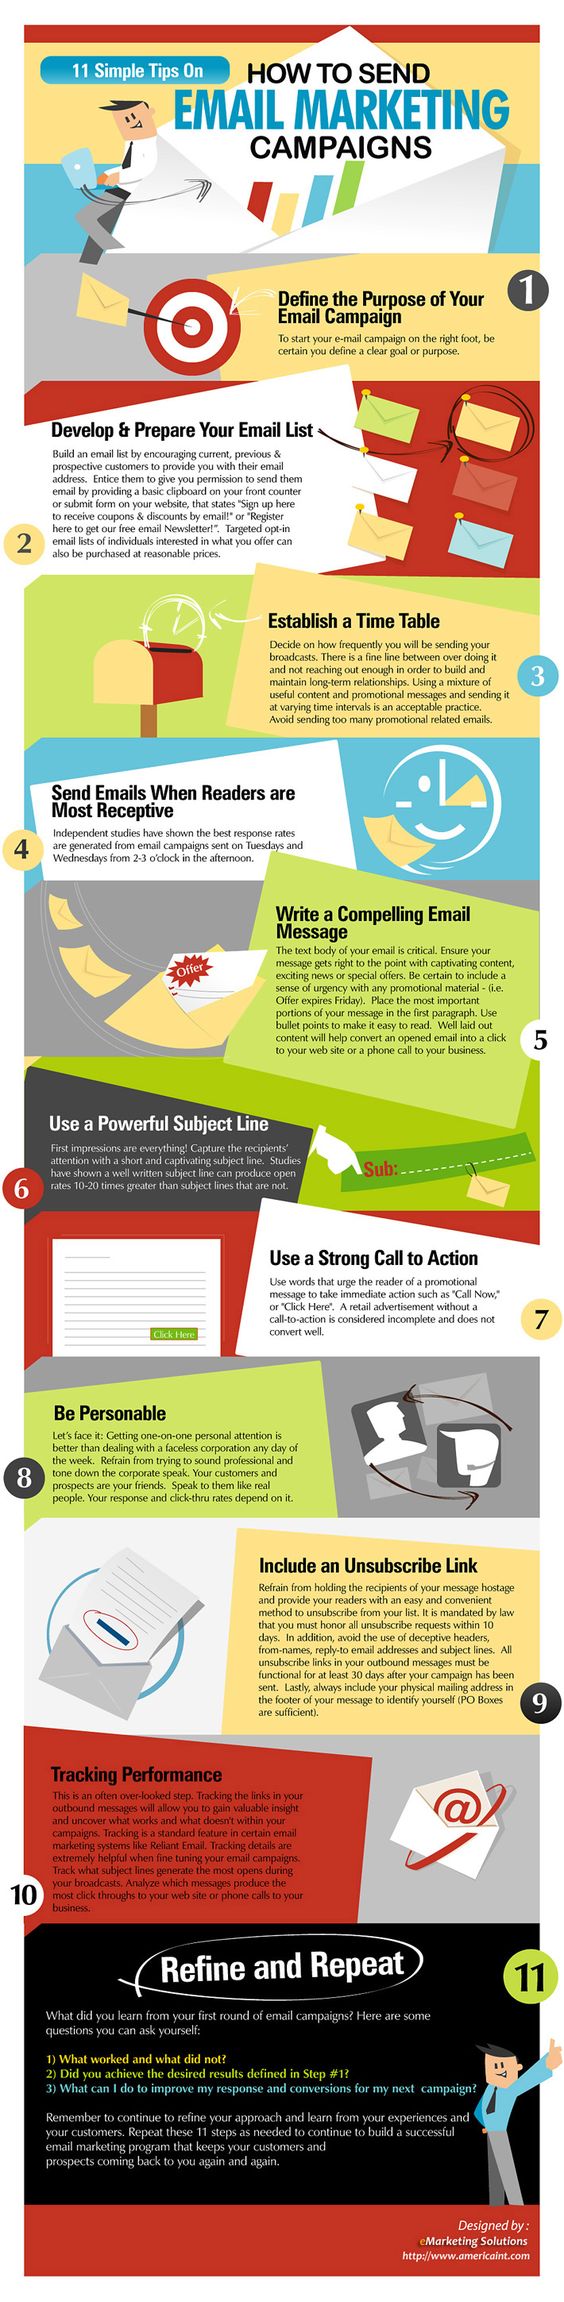 Great guide for email marketeers - We completely agree with this and follow all these rules for our clients